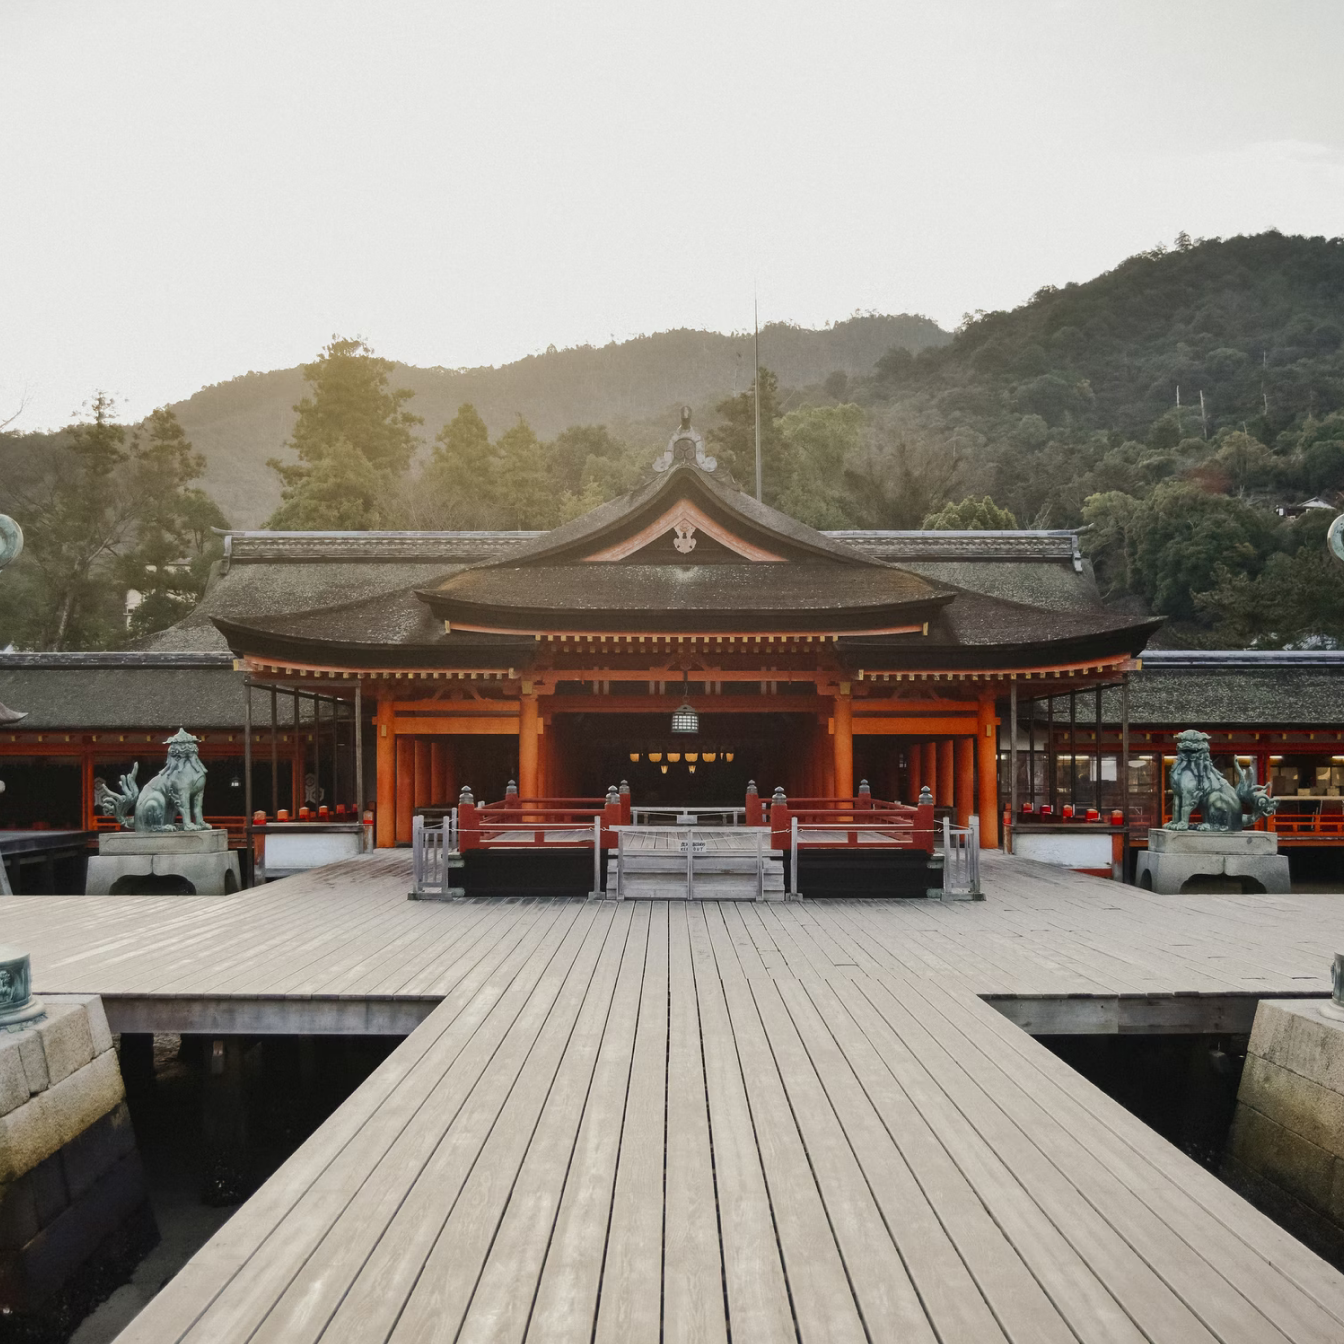 Red wooden Japanese temple in the morning light, surrounded by forest with traditional statues on either side.Red wooden Japanese temple in the morning light, surrounded by forest with traditional statues on either side.